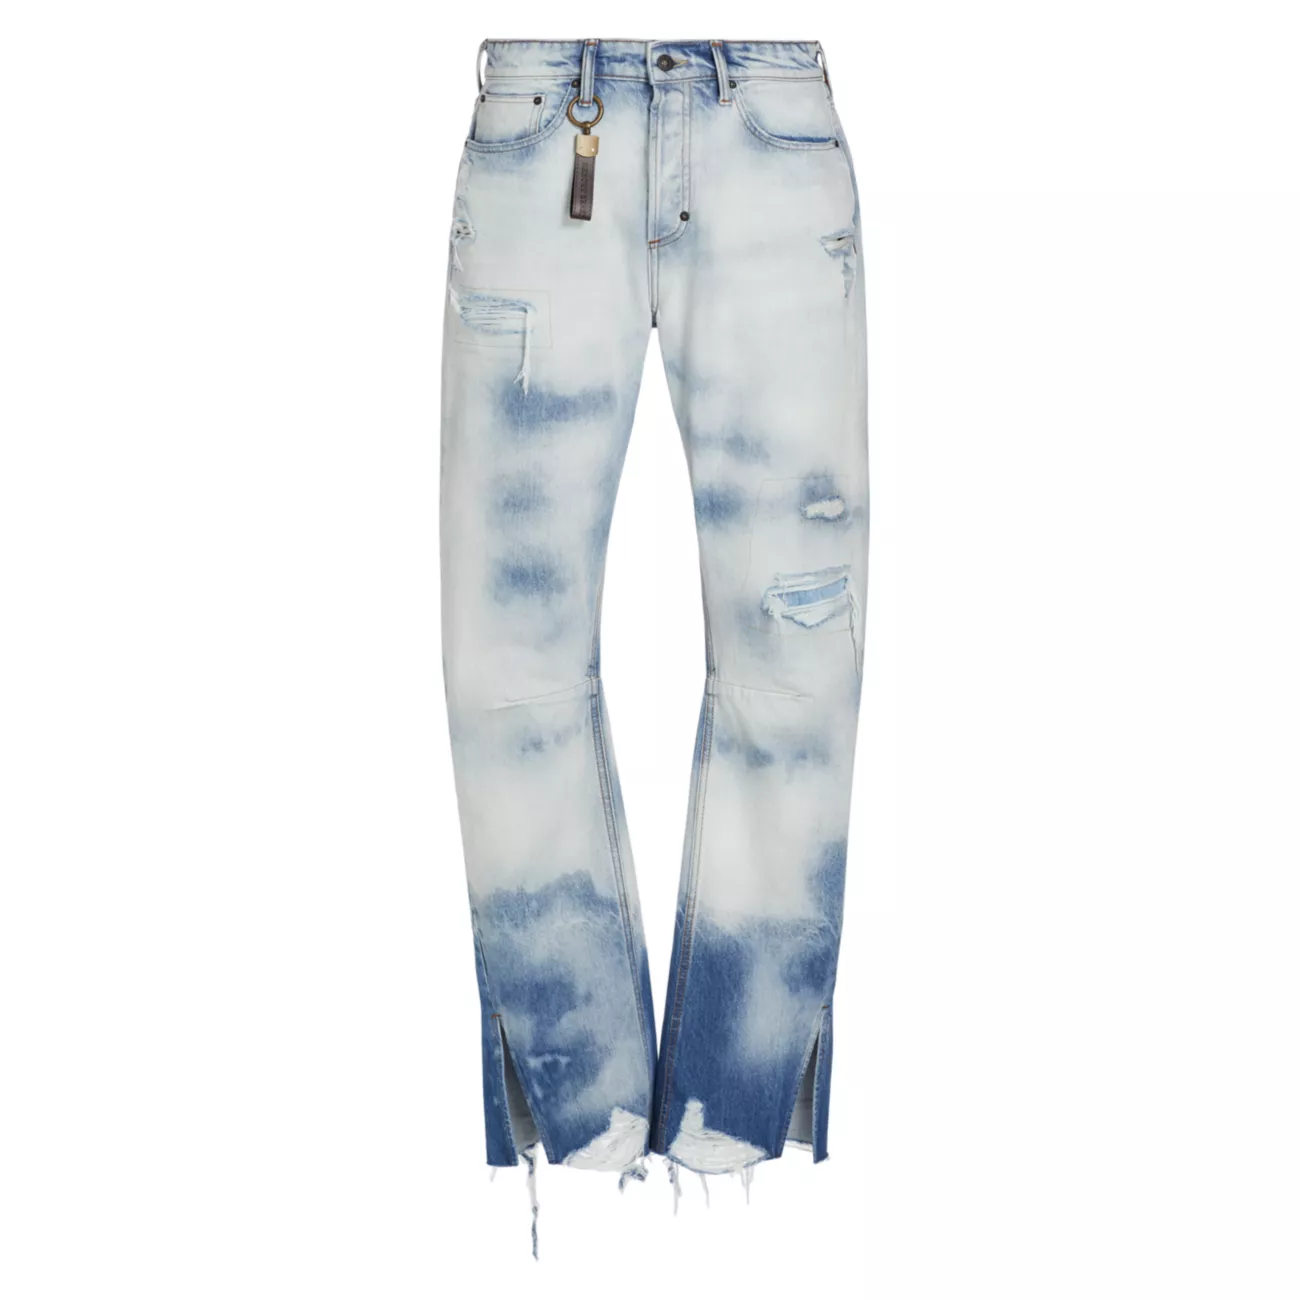 Hiroshima Bleached Distressed Jeans Prps